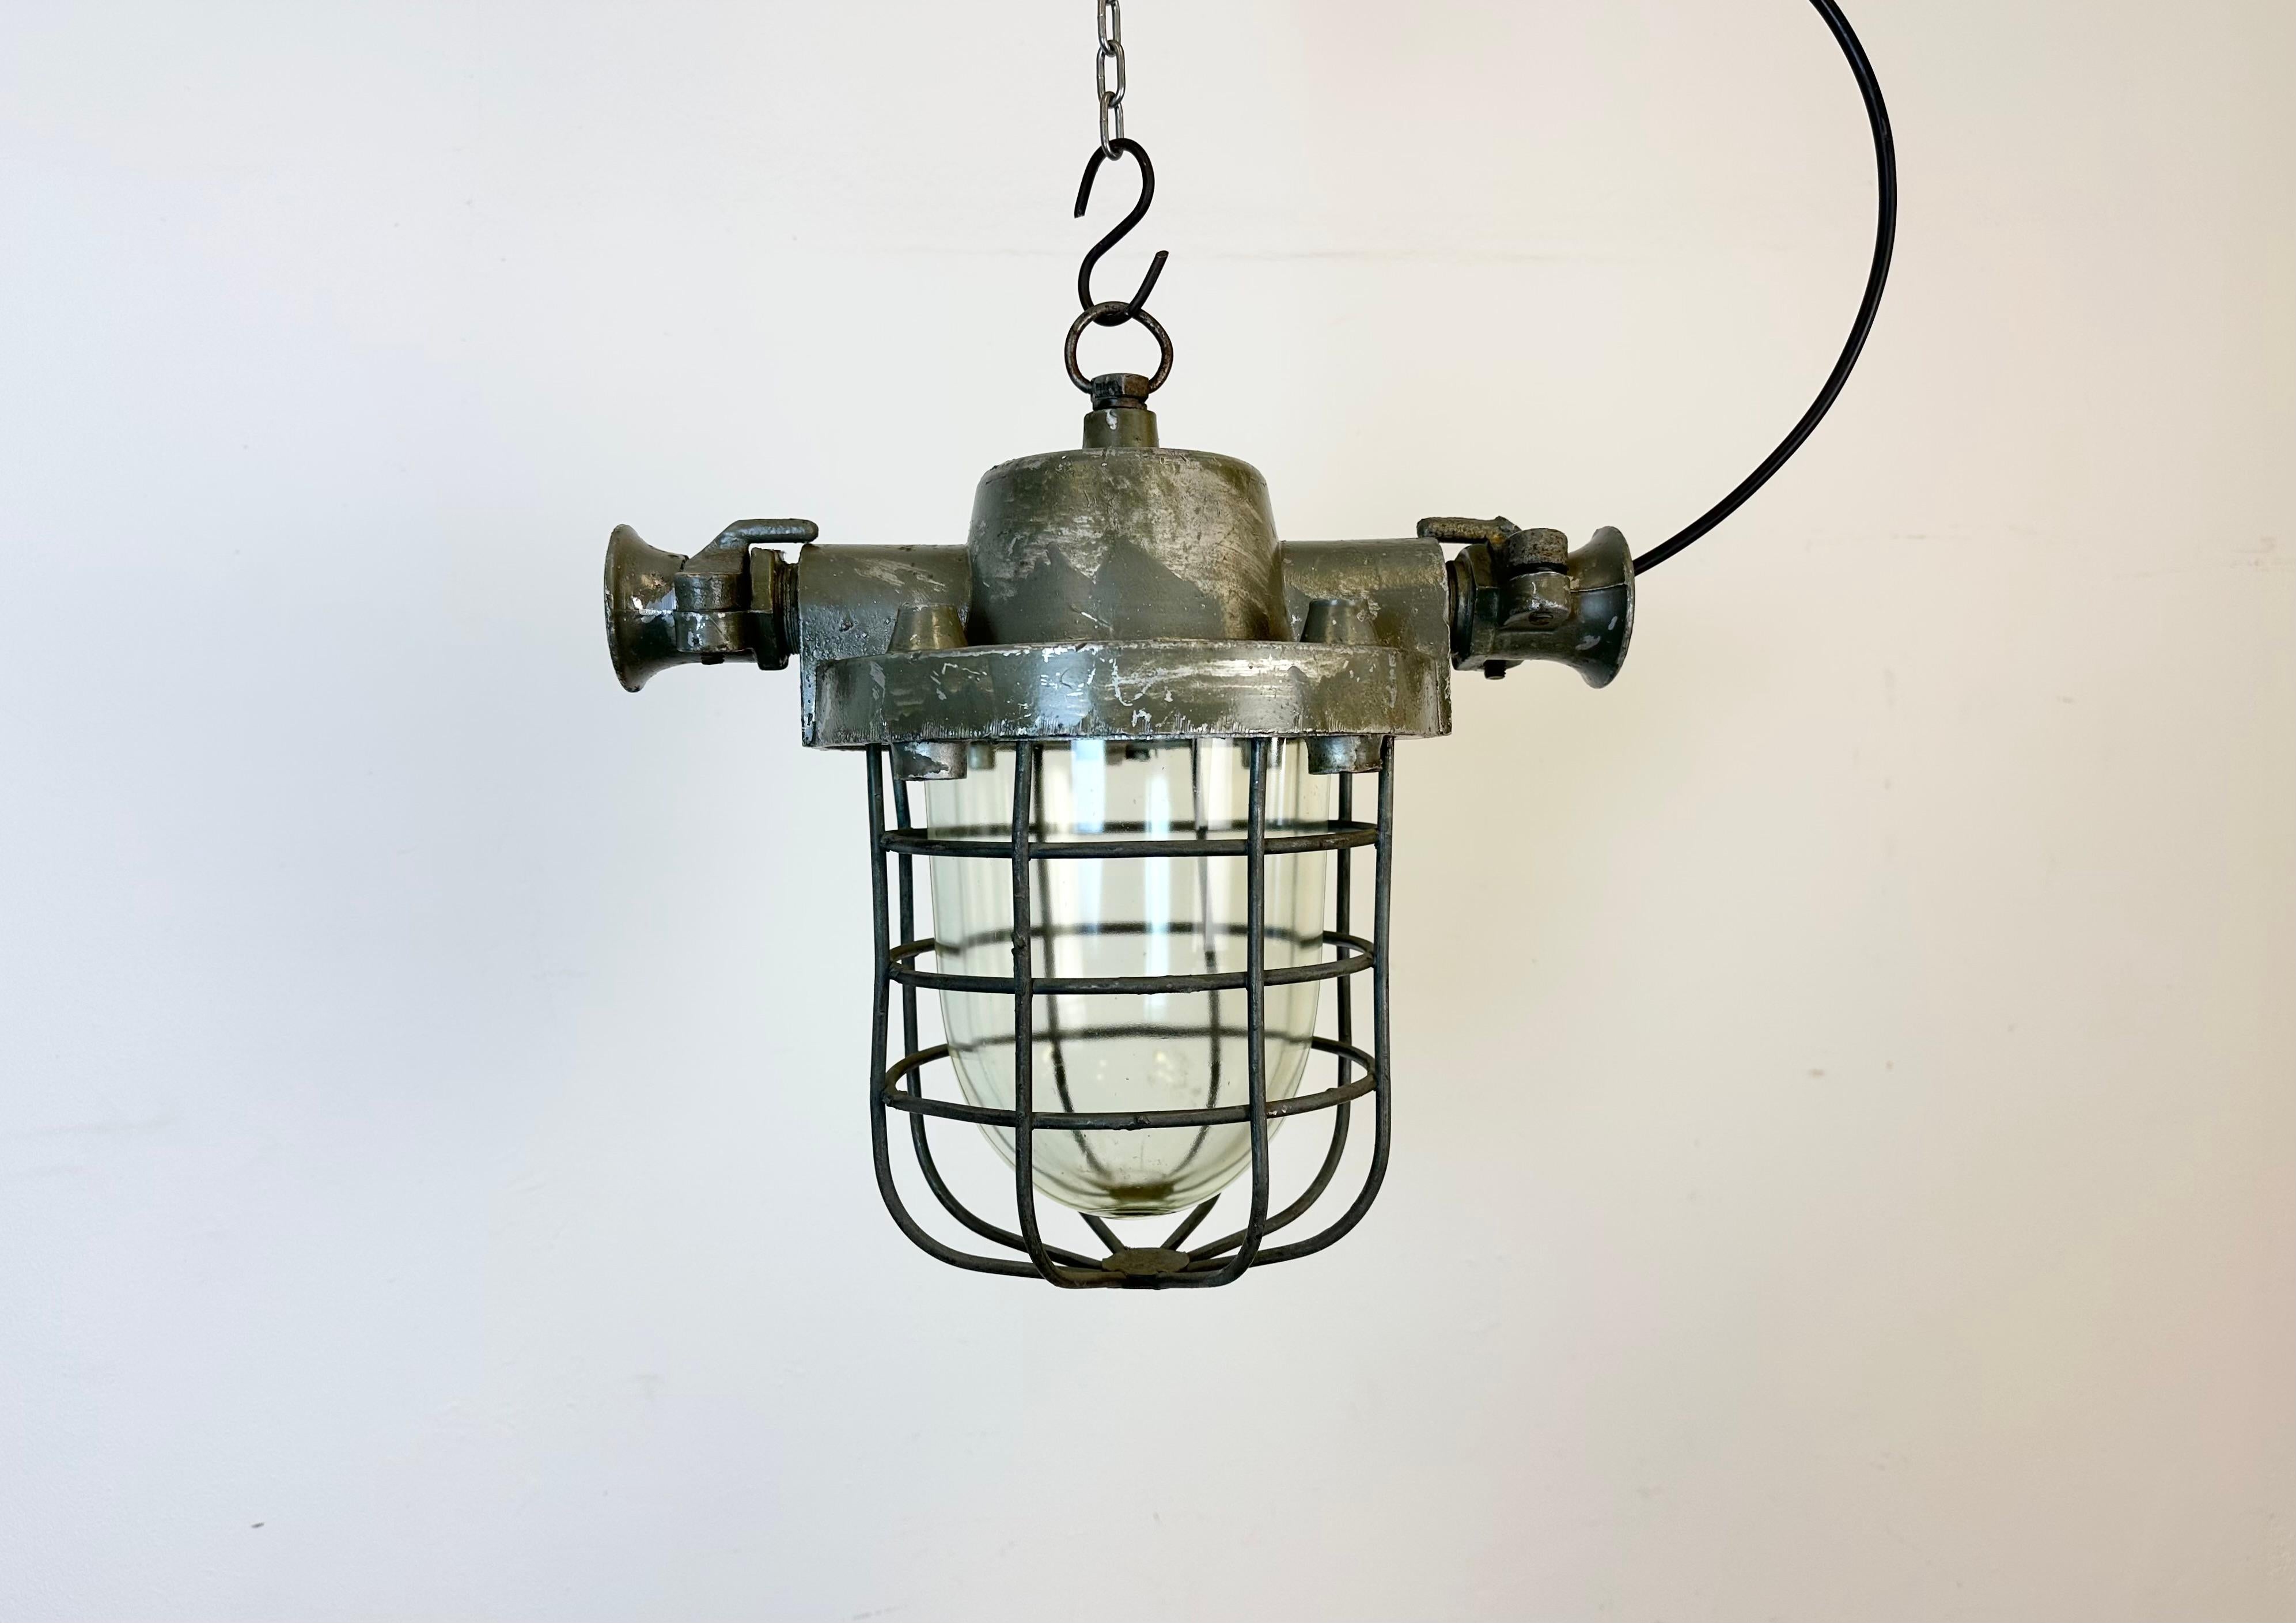 Industrial exposion-proof hanging lamp made in Poland during the 1960s. These lamps were used in factories where was a danger of gas or dust explosion. It features a cast aluminium body, a clear glass cover an an iron grid. The porcelain socket